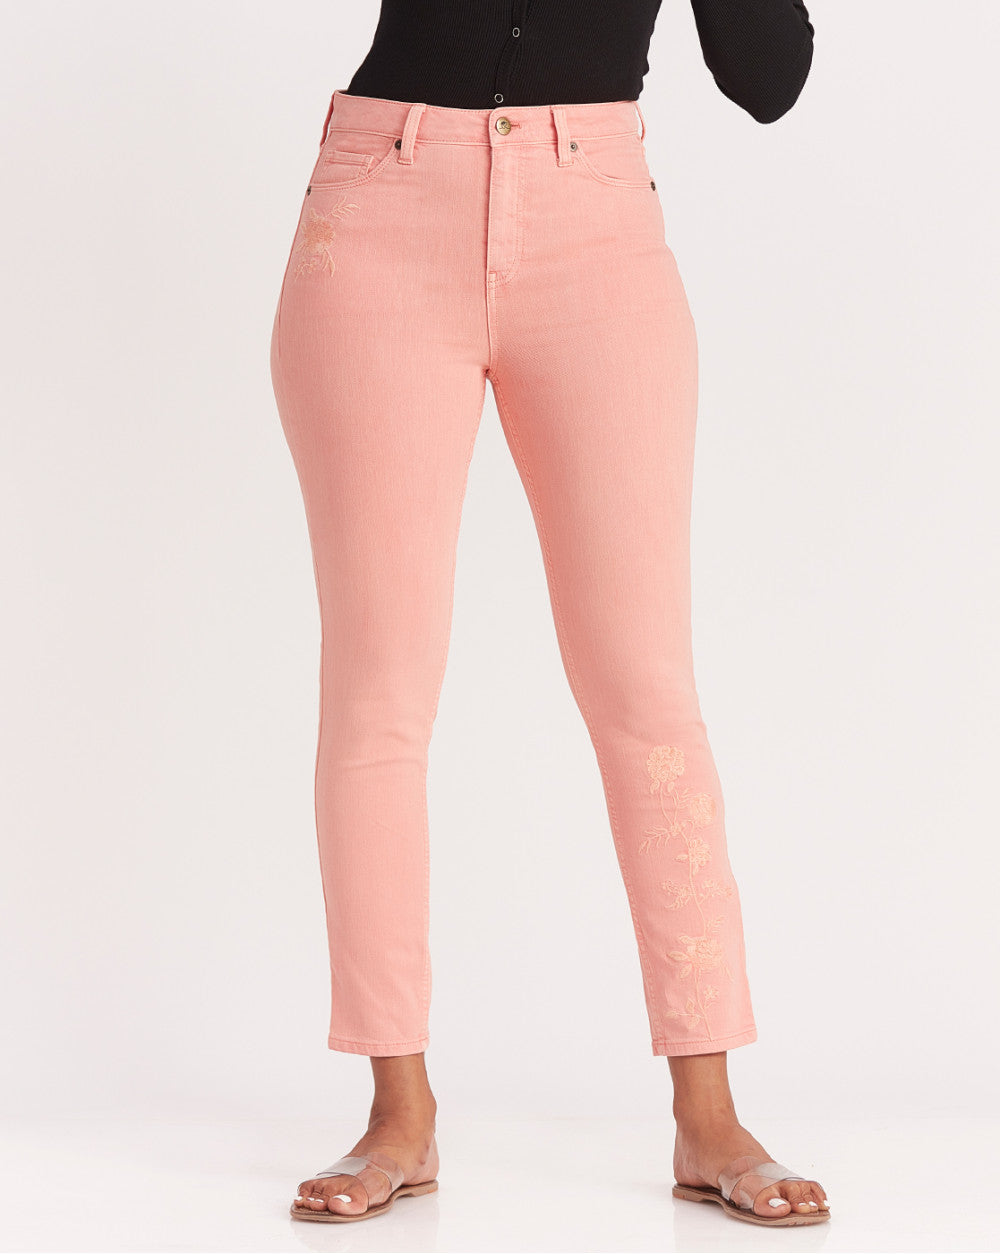 Skinny Fit High Waist Floral Embroidered Colored Jeans - Coral